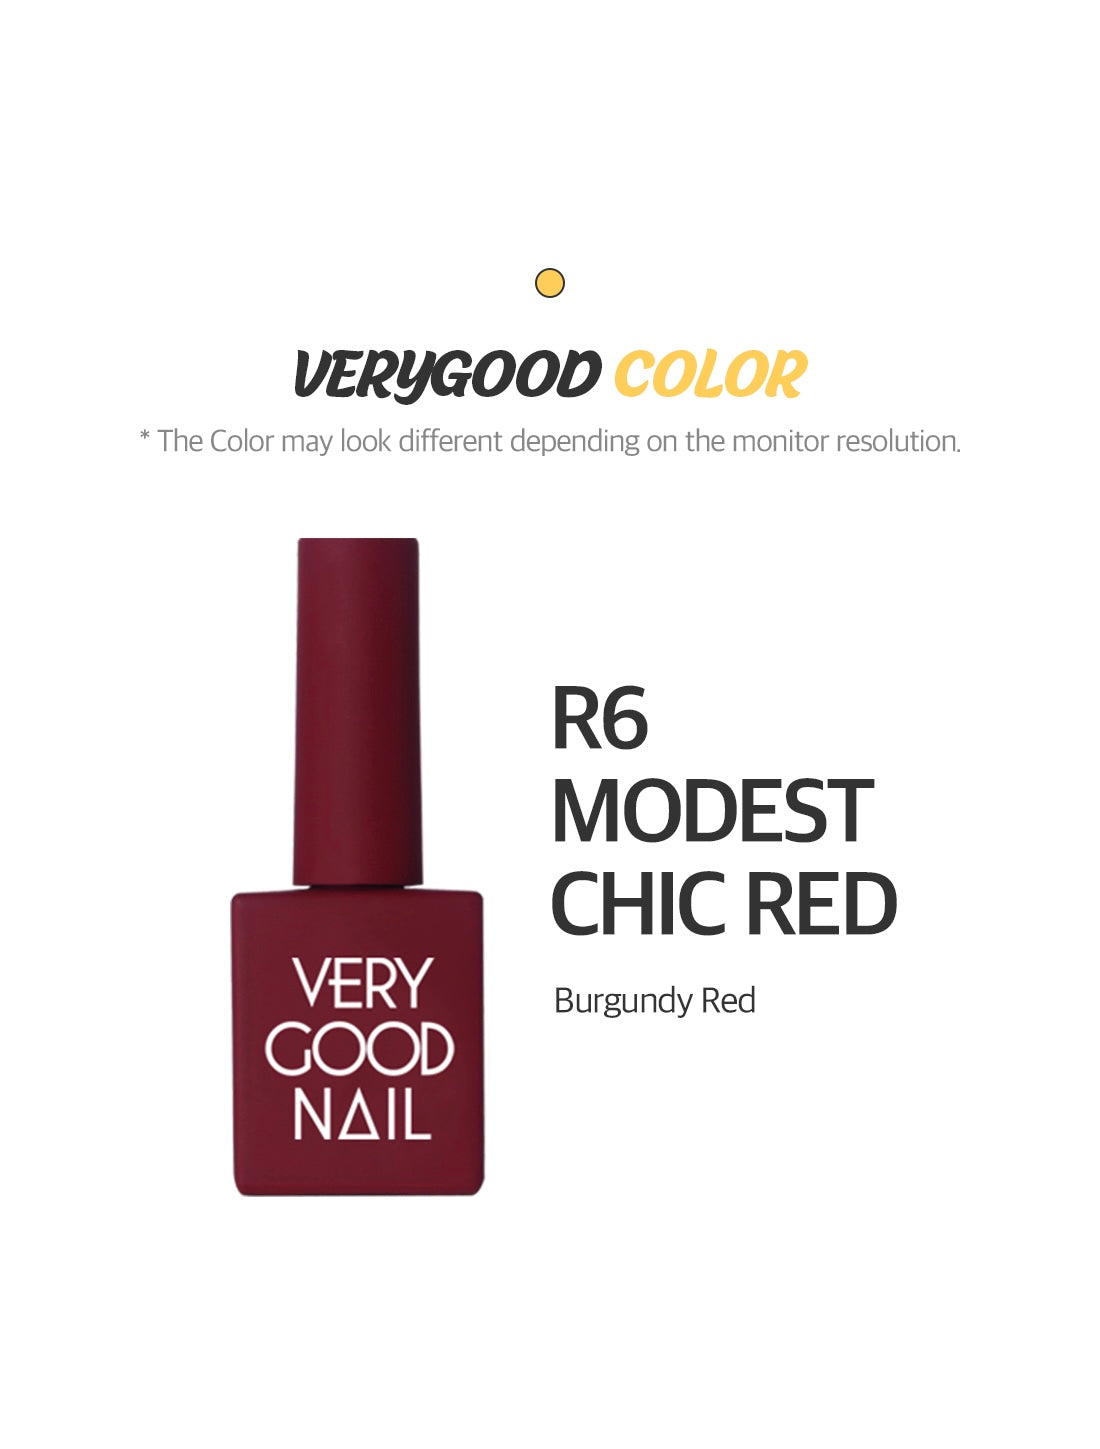 R6 - Modest Chic Red